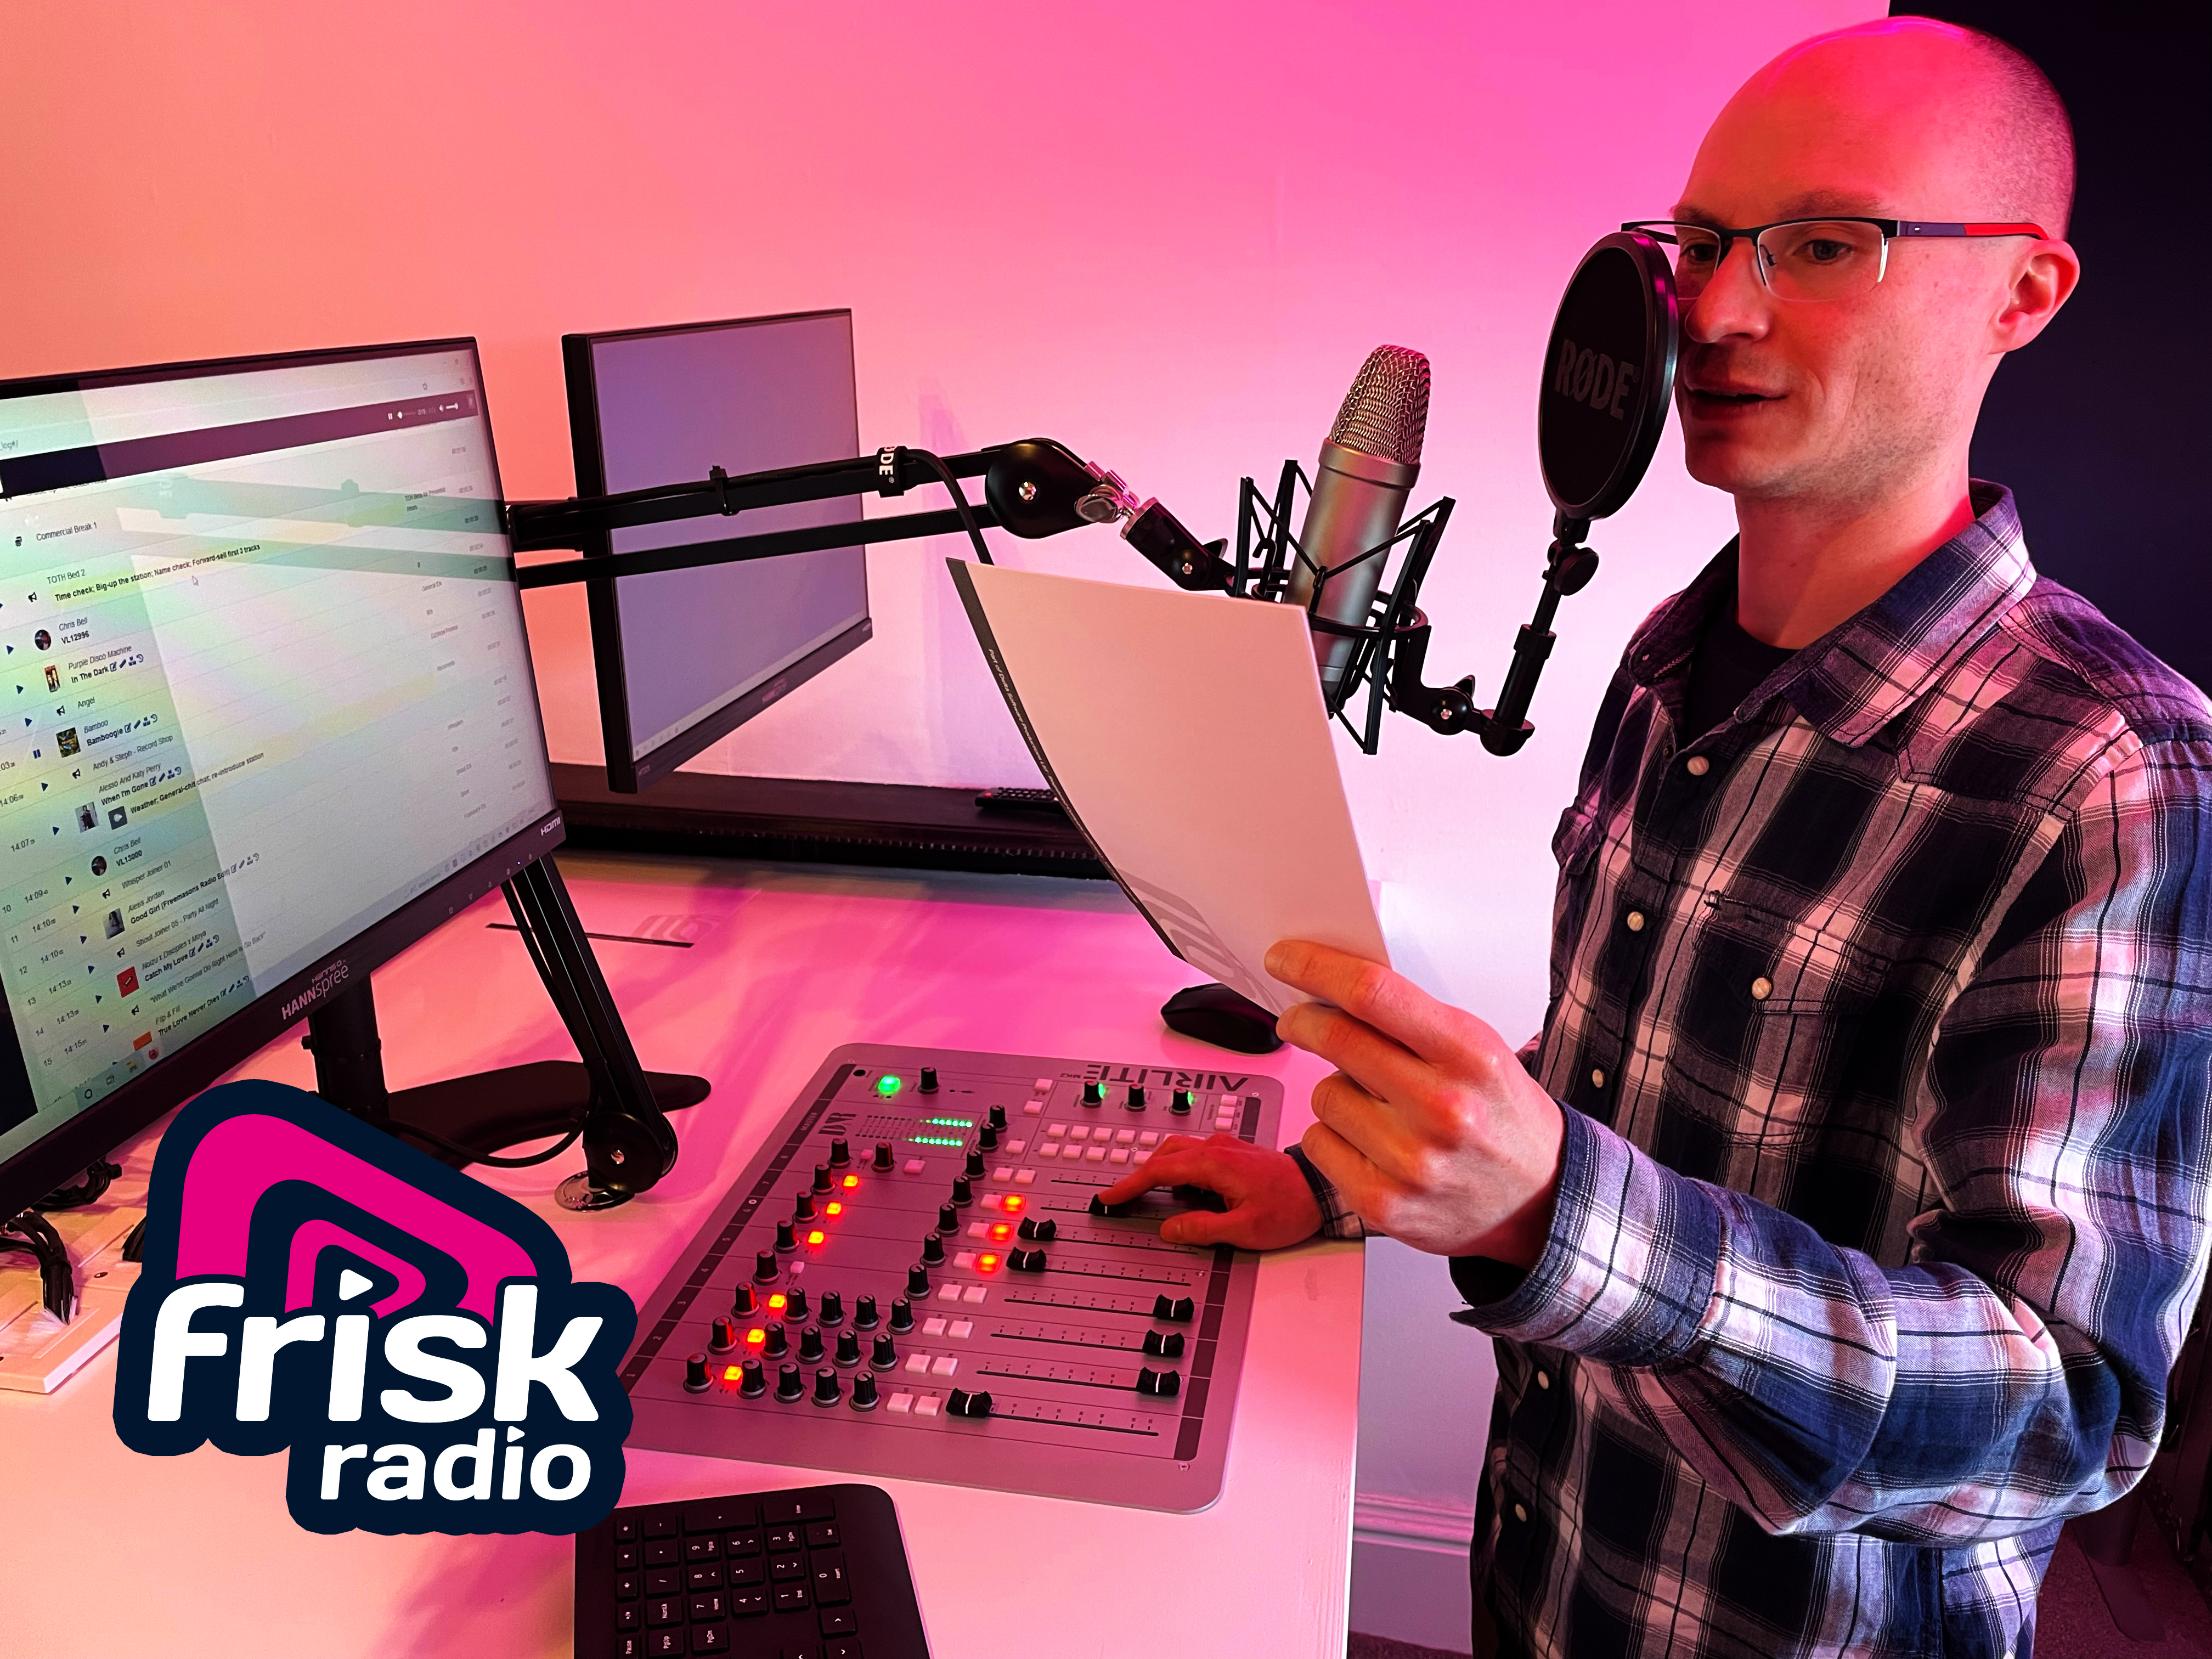 Promising North East SS-DAB station celebrates successful first quarter at Frisk Radio - The Rhythm of The North East